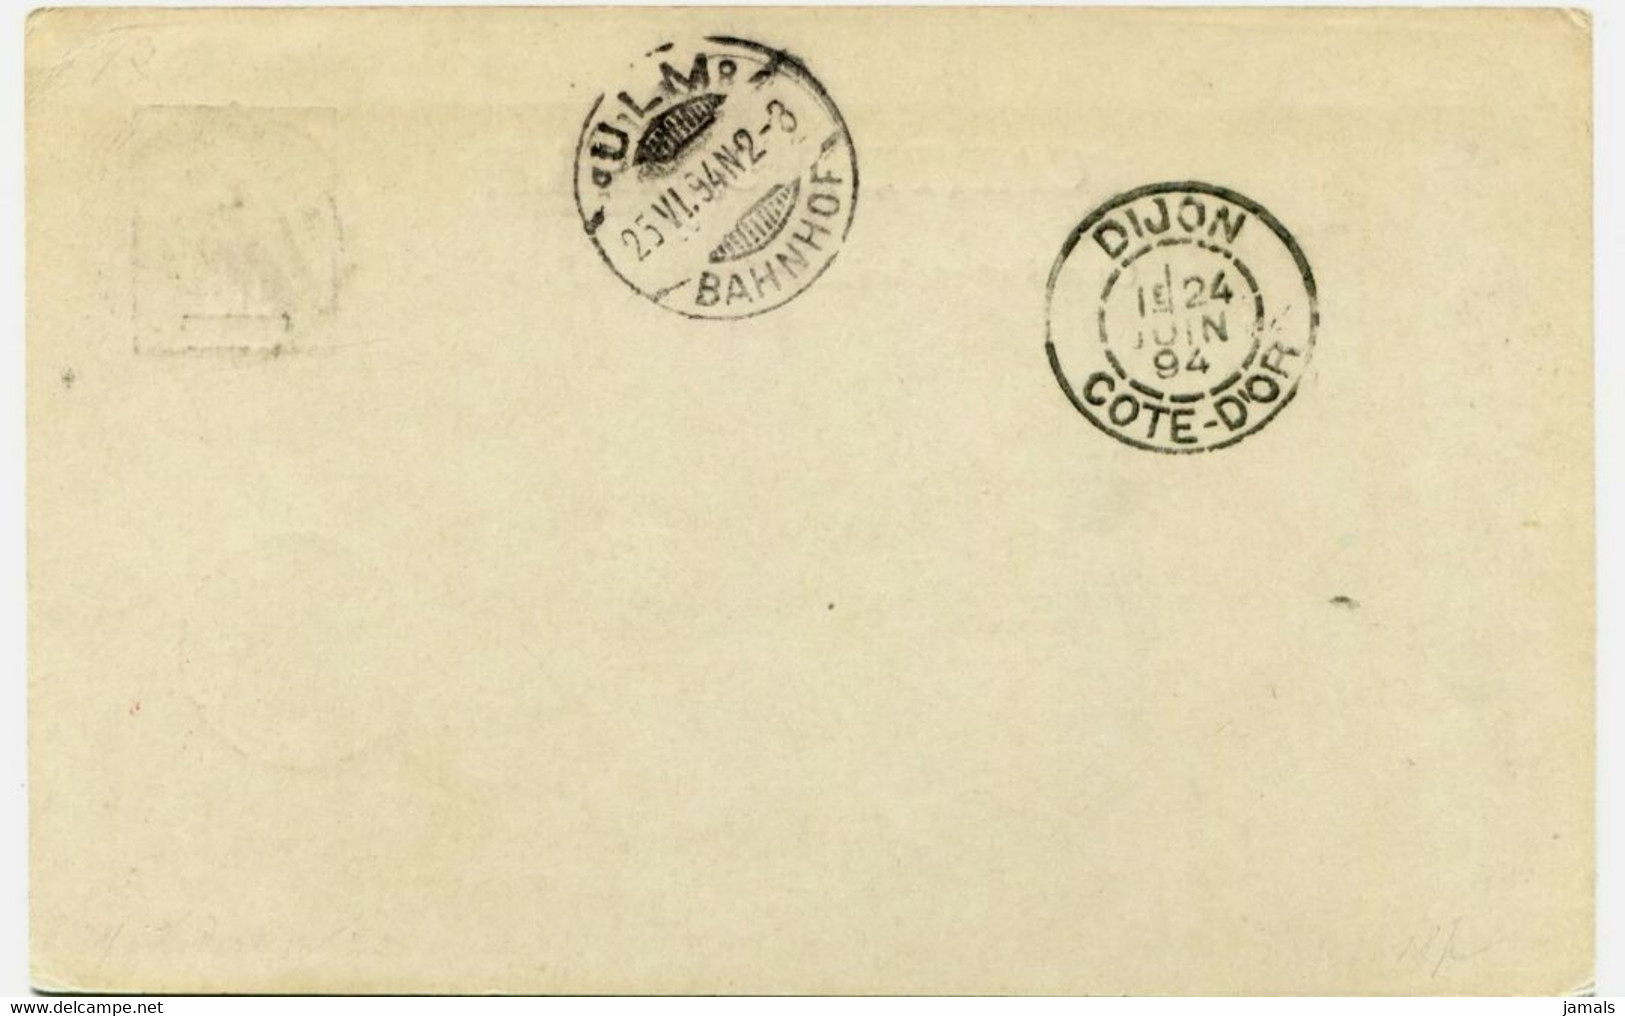 French India, Postal Stationary Card, Pondichery Postmark - Covers & Documents